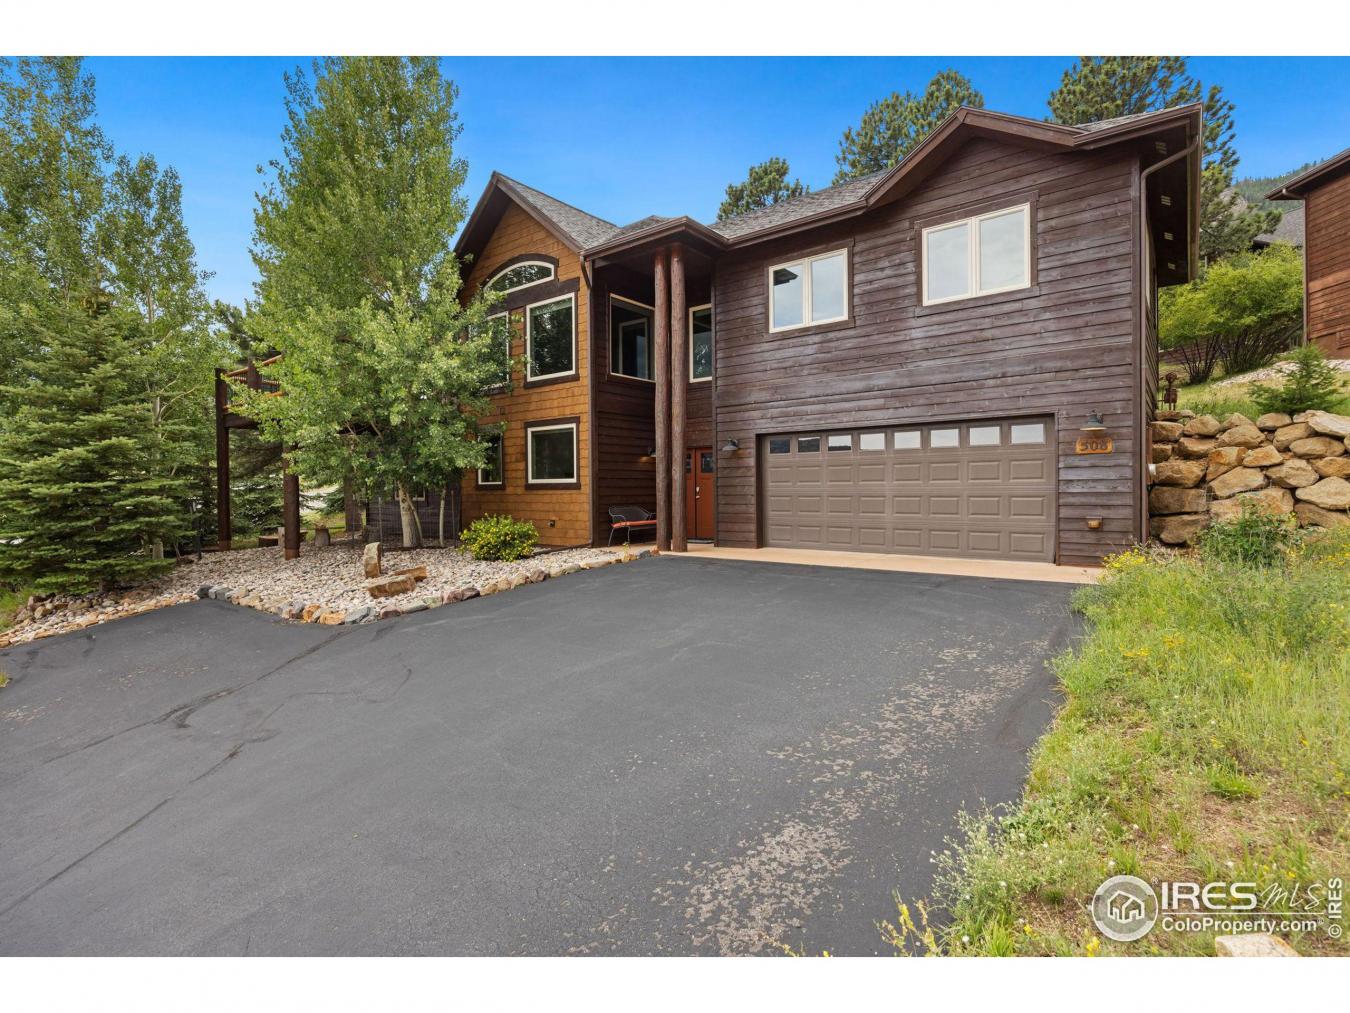 508 Promontory Drive, Estes Park, Colorado, 80517, United States, 3 Bedrooms Bedrooms, ,2 BathroomsBathrooms,Residential,For Sale,508 Promontory Drive,1322194